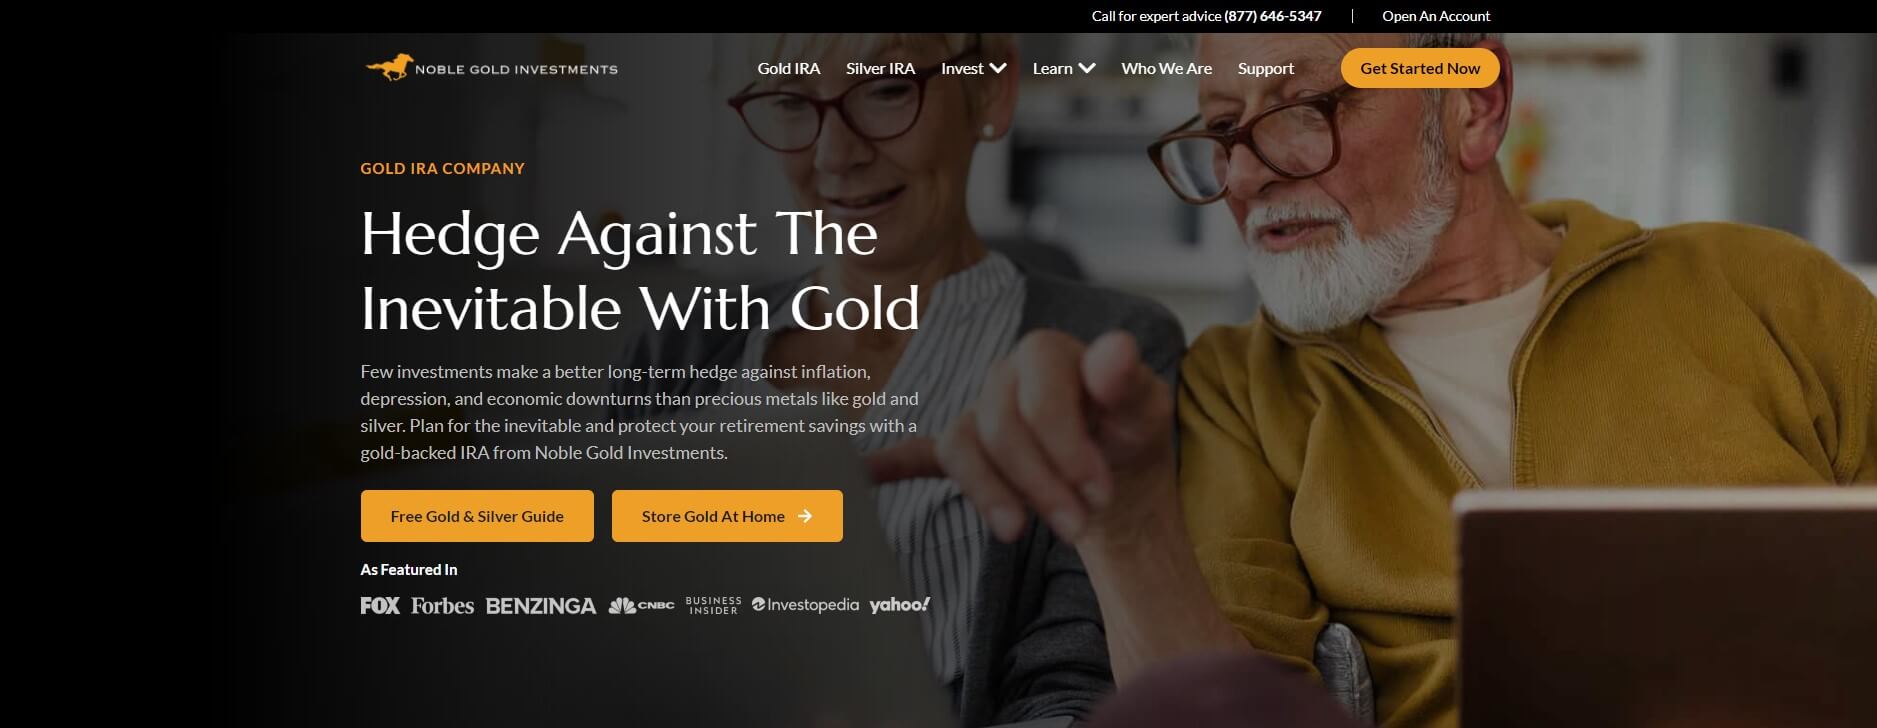 Noble Gold Review - Website